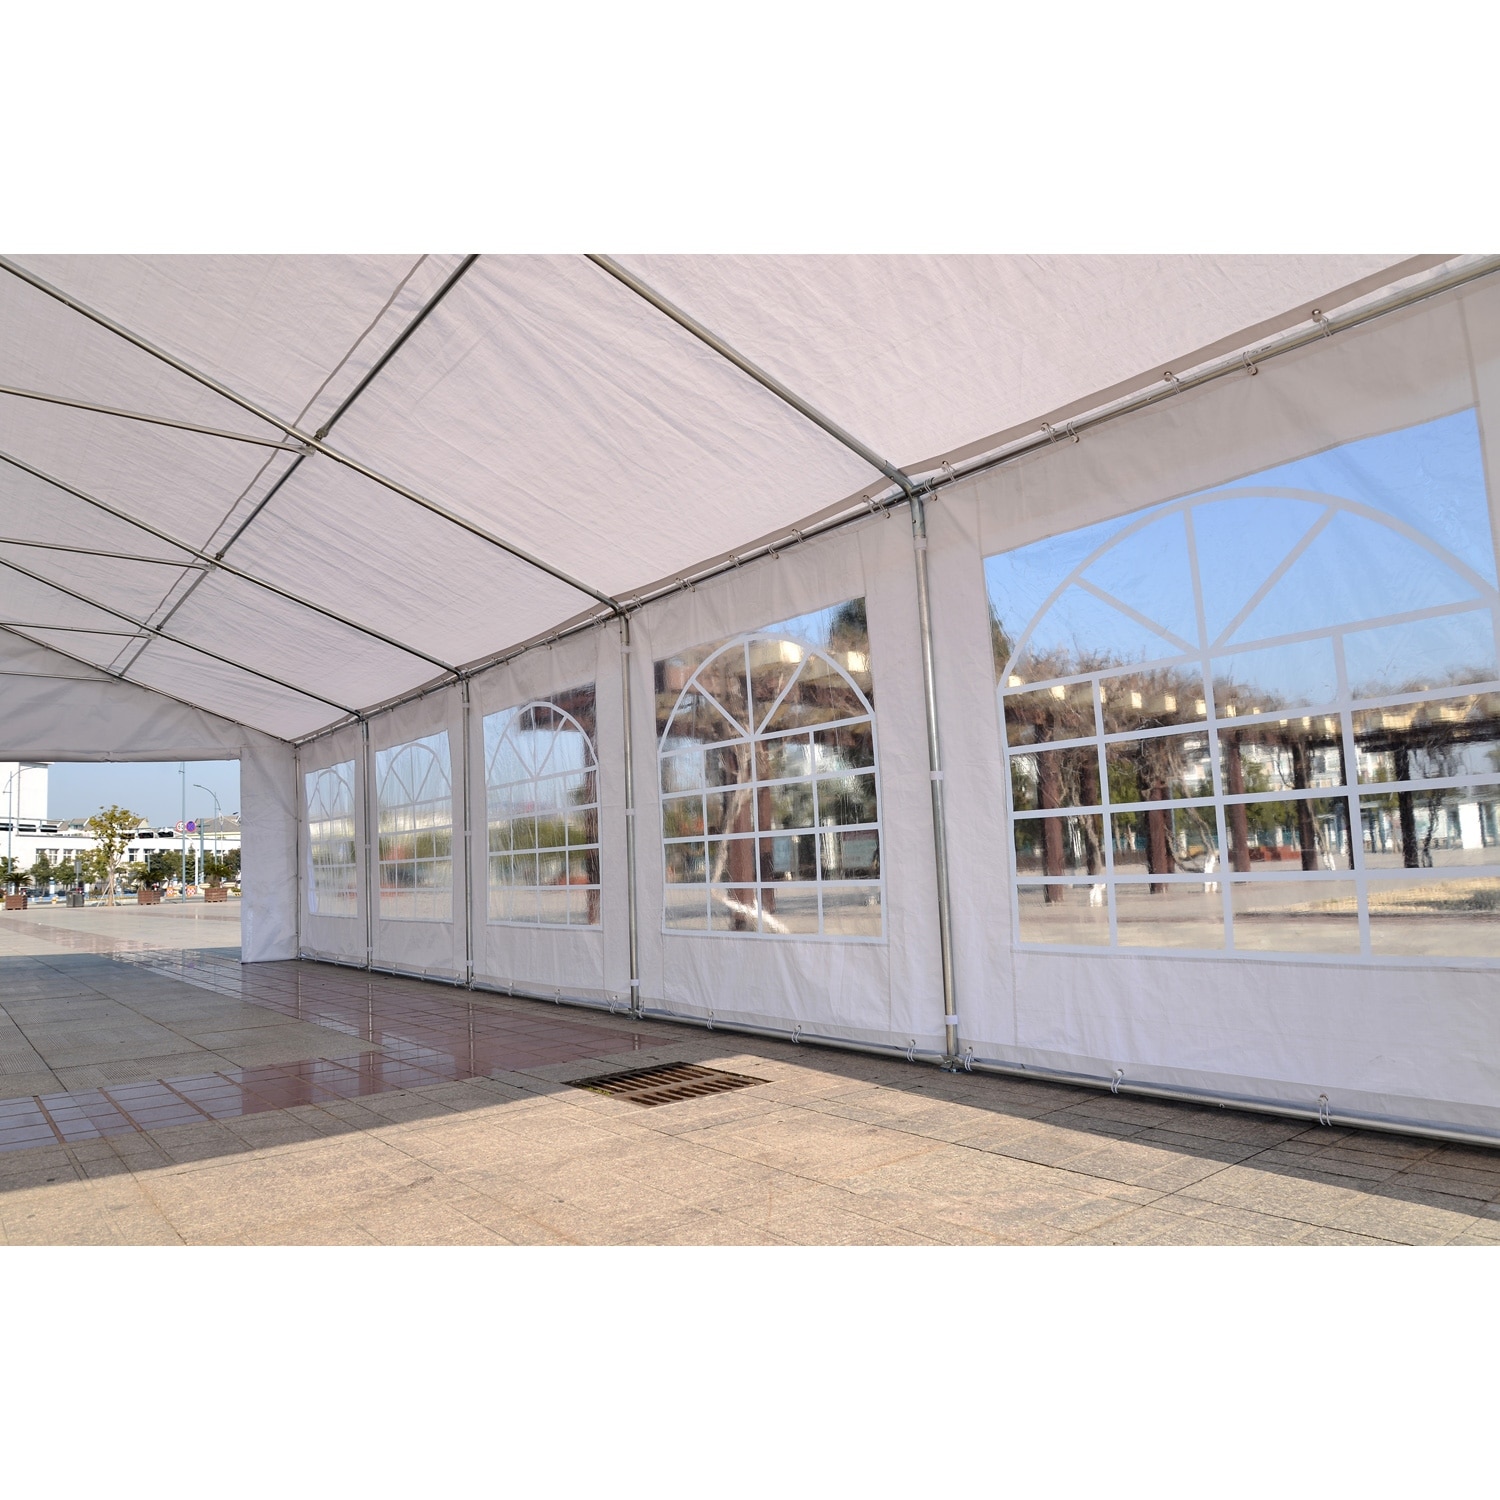 Outsunny  32 x 20 Large Outdoor Carport Canopy Party Tent with Removable Protective Sidewalls and Versatile Uses, White